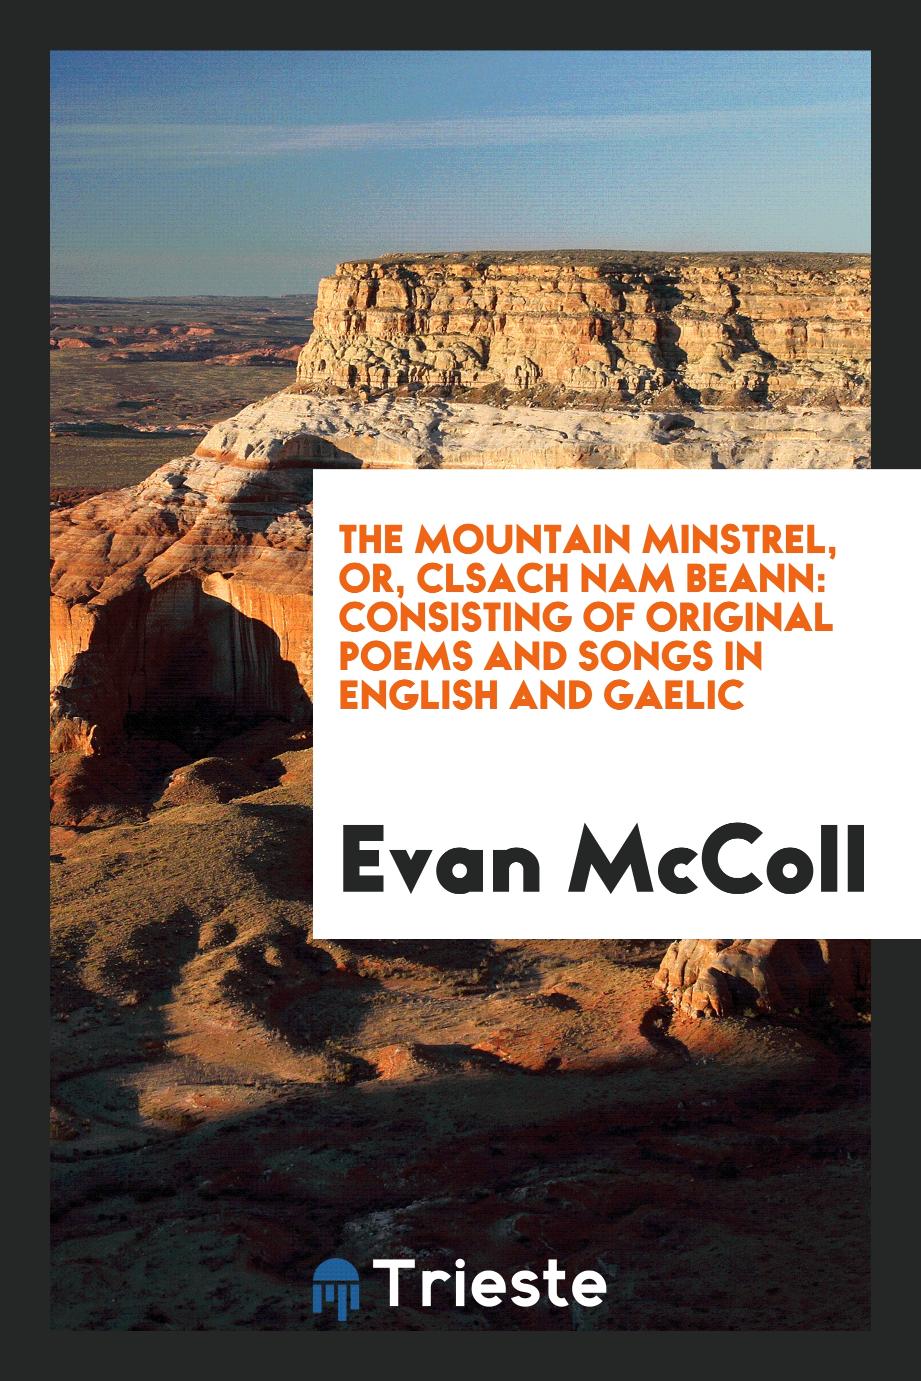 The mountain minstrel, or, Clsach nam beann: consisting of original poems and songs in English and Gaelic